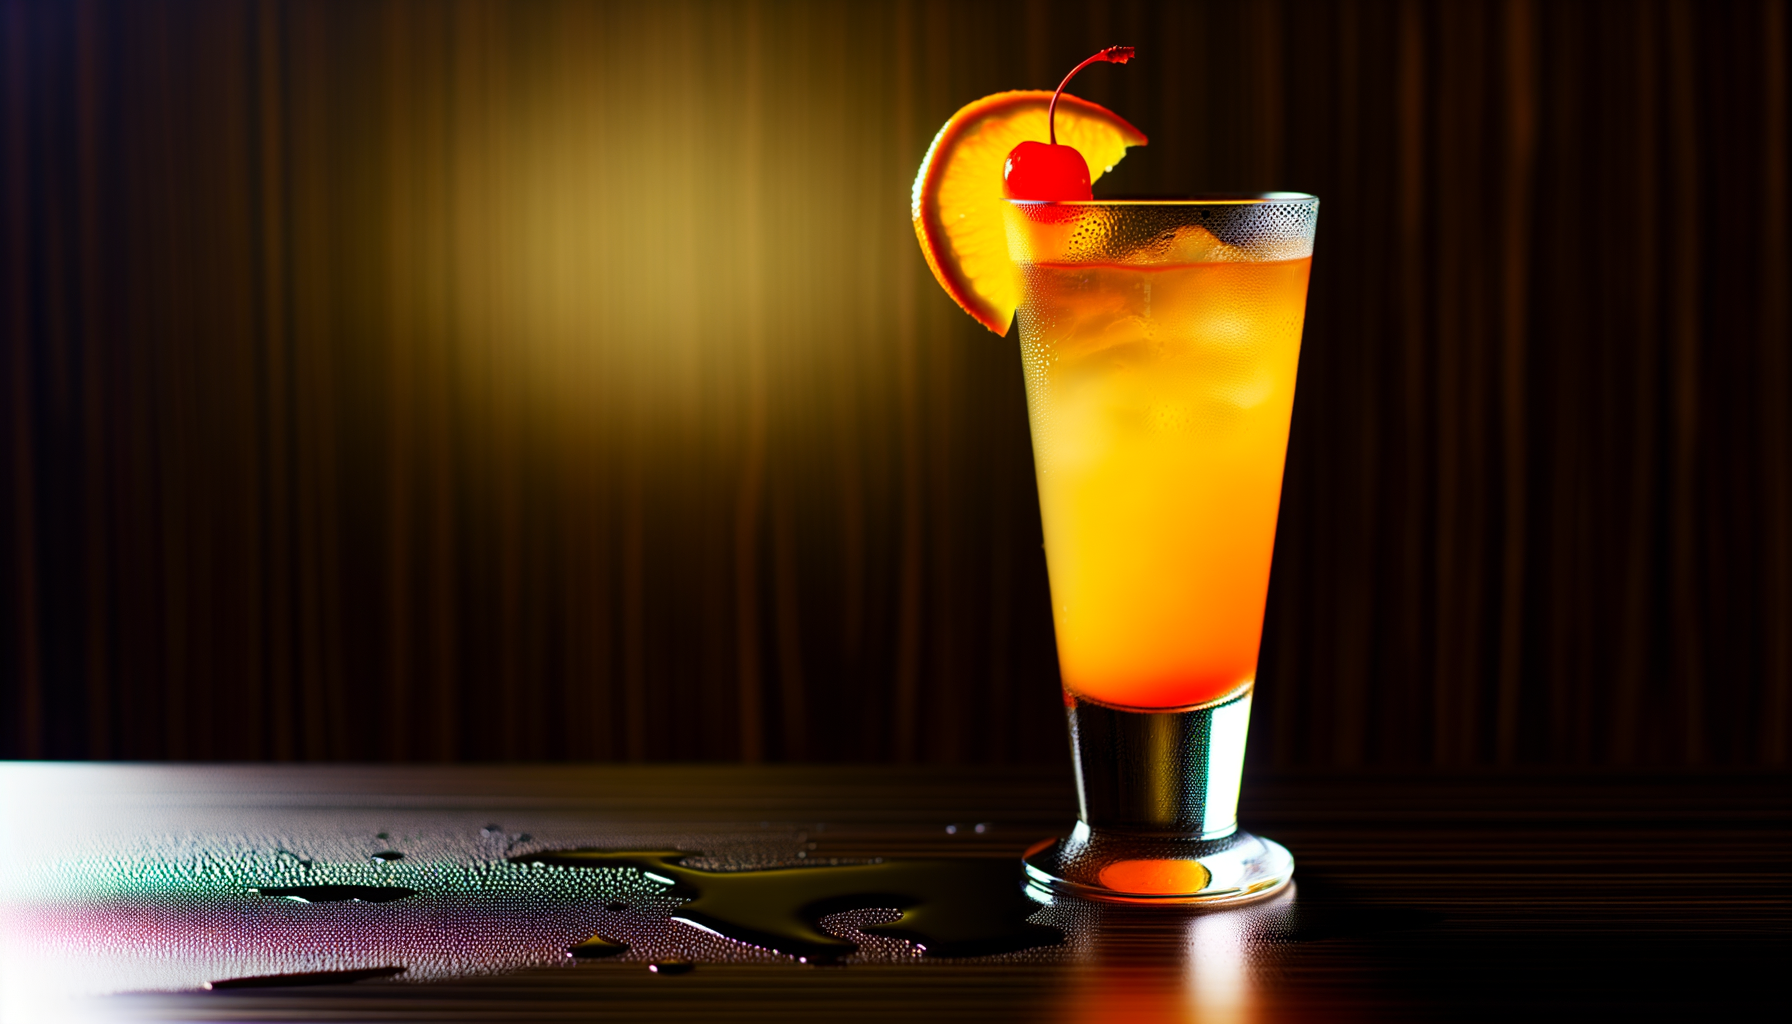 Refreshing fuzzy navel cocktail with peach schnapps and orange juice, garnished with a slice of orange, on a dark counter.